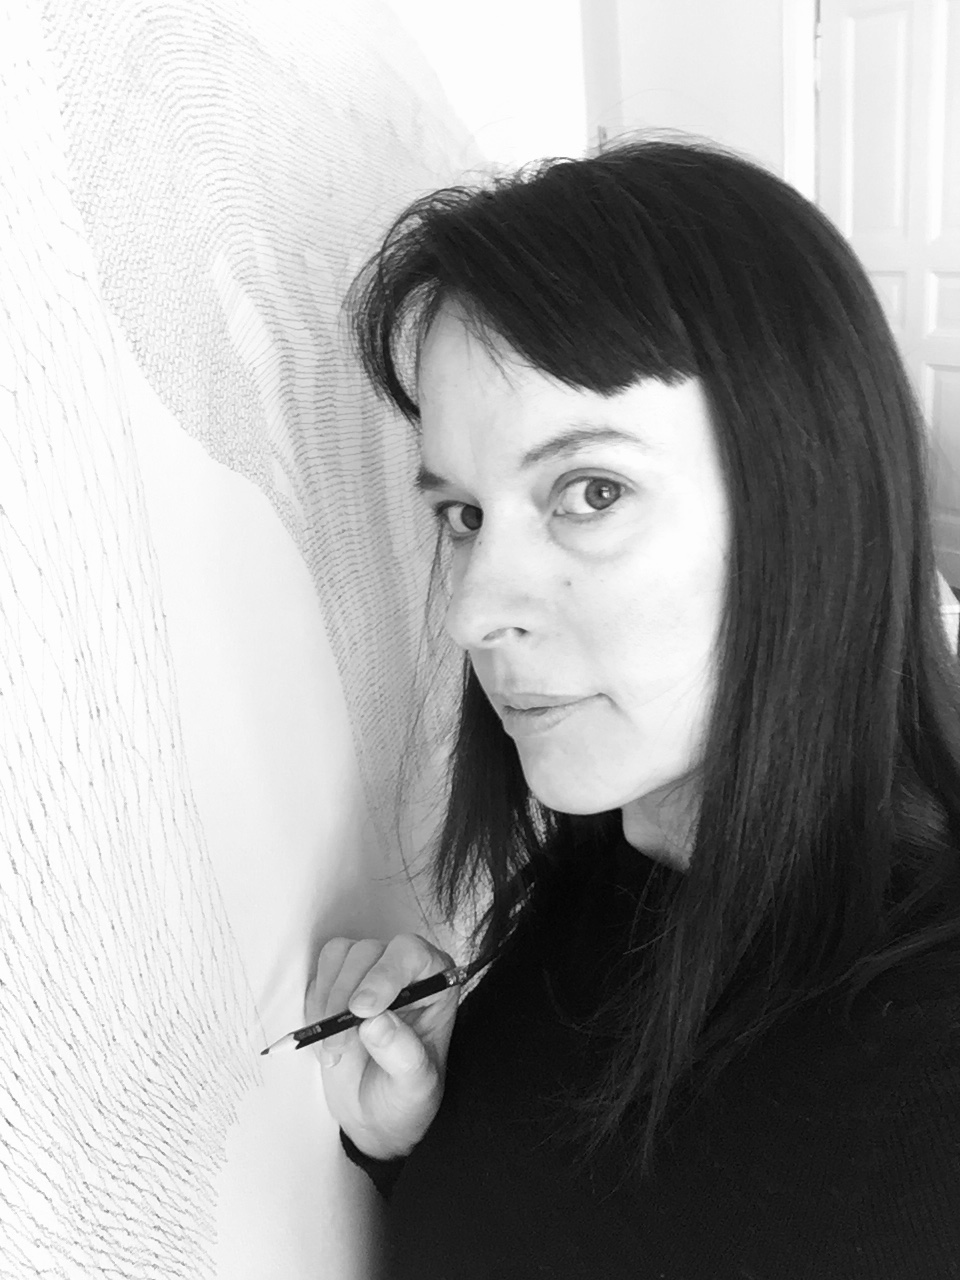 Kathrin Bauer working on the walldrawing 